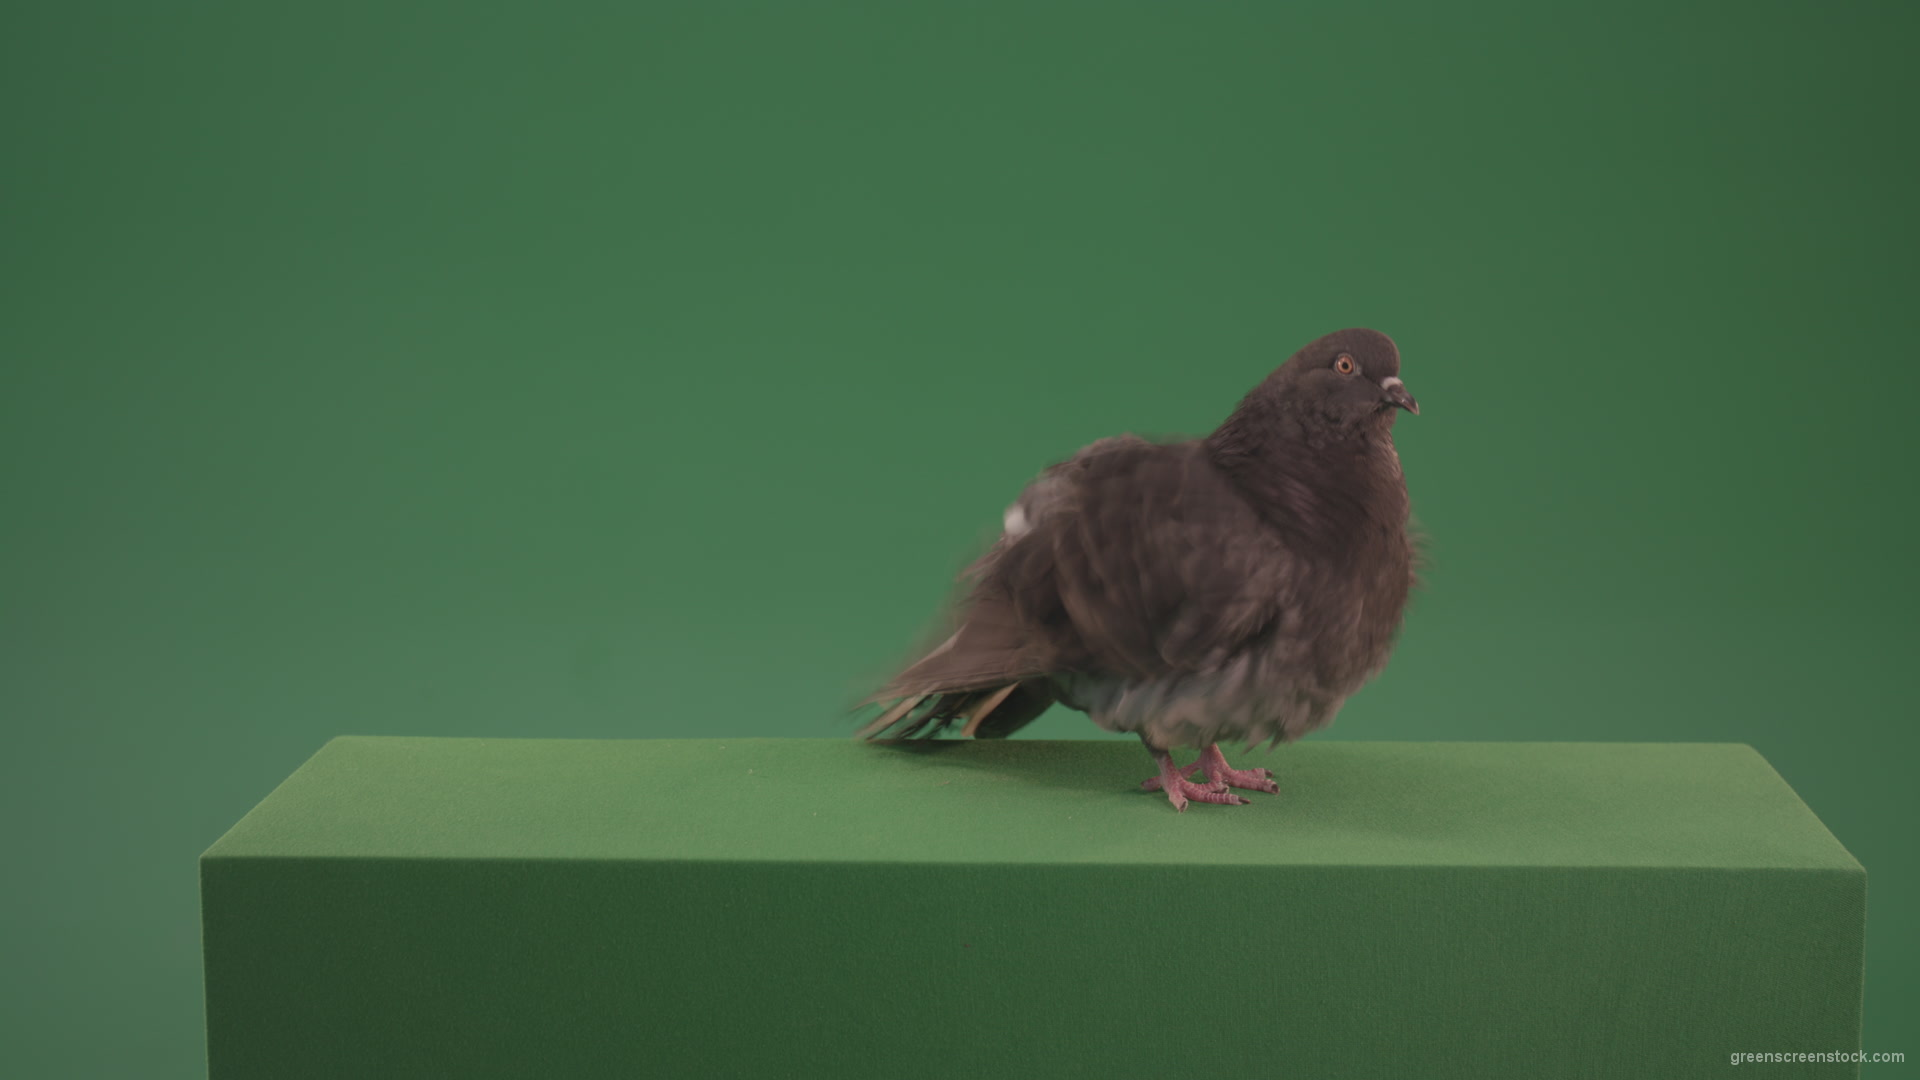 Bird-landed-and-inspected-the-territory-isolated-on-chromakey-background_006 Green Screen Stock